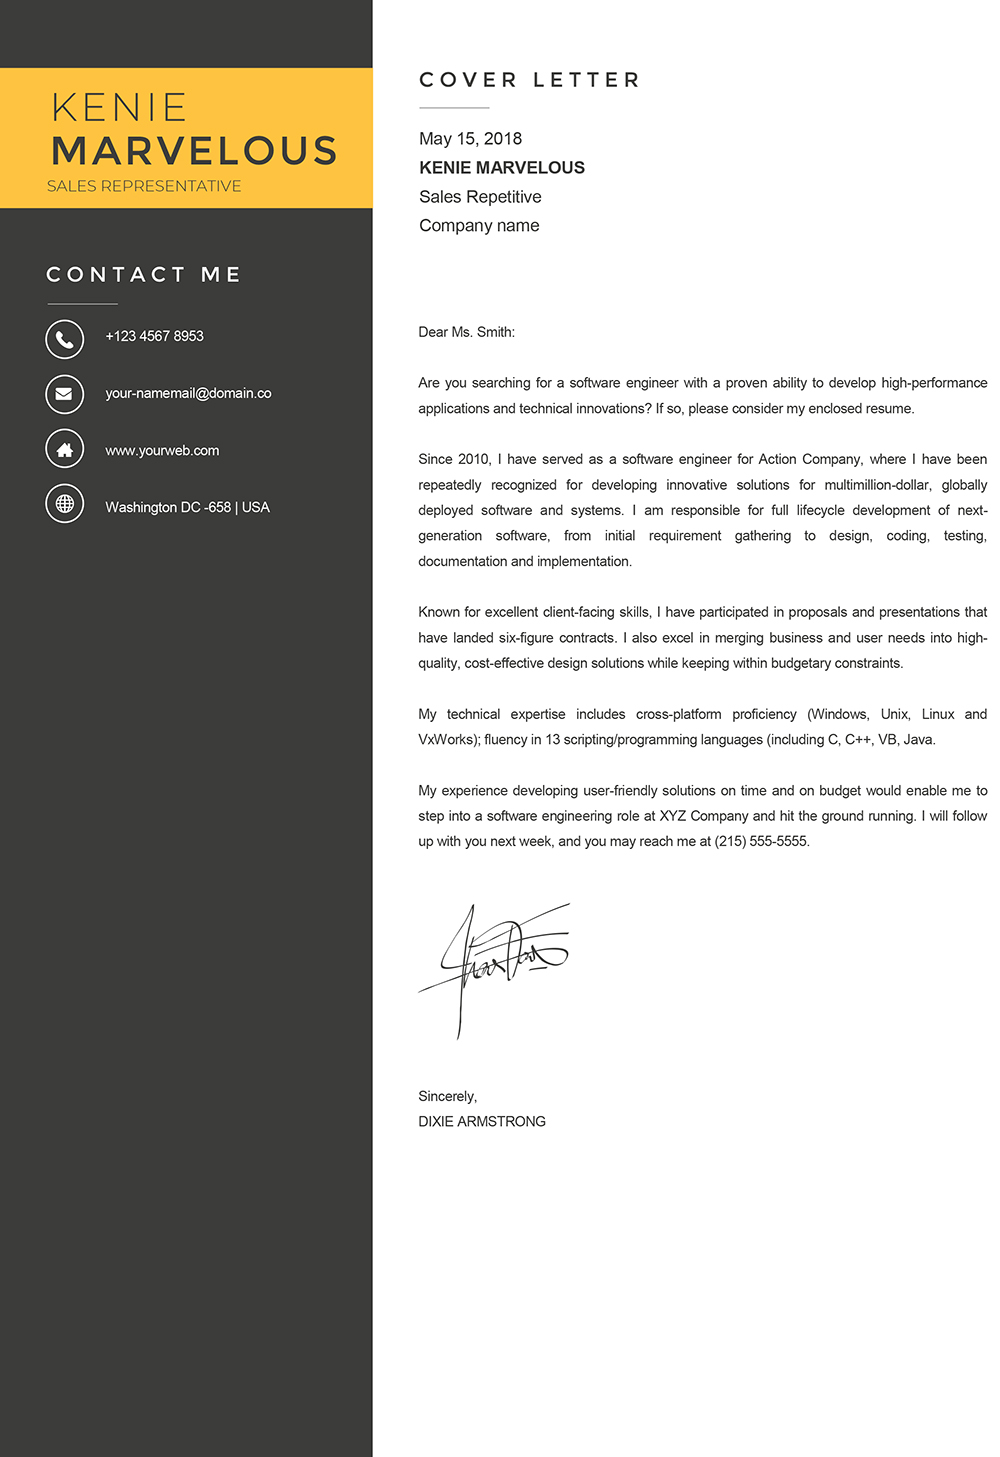 Format For Cover Letter from www.mycvstore.com